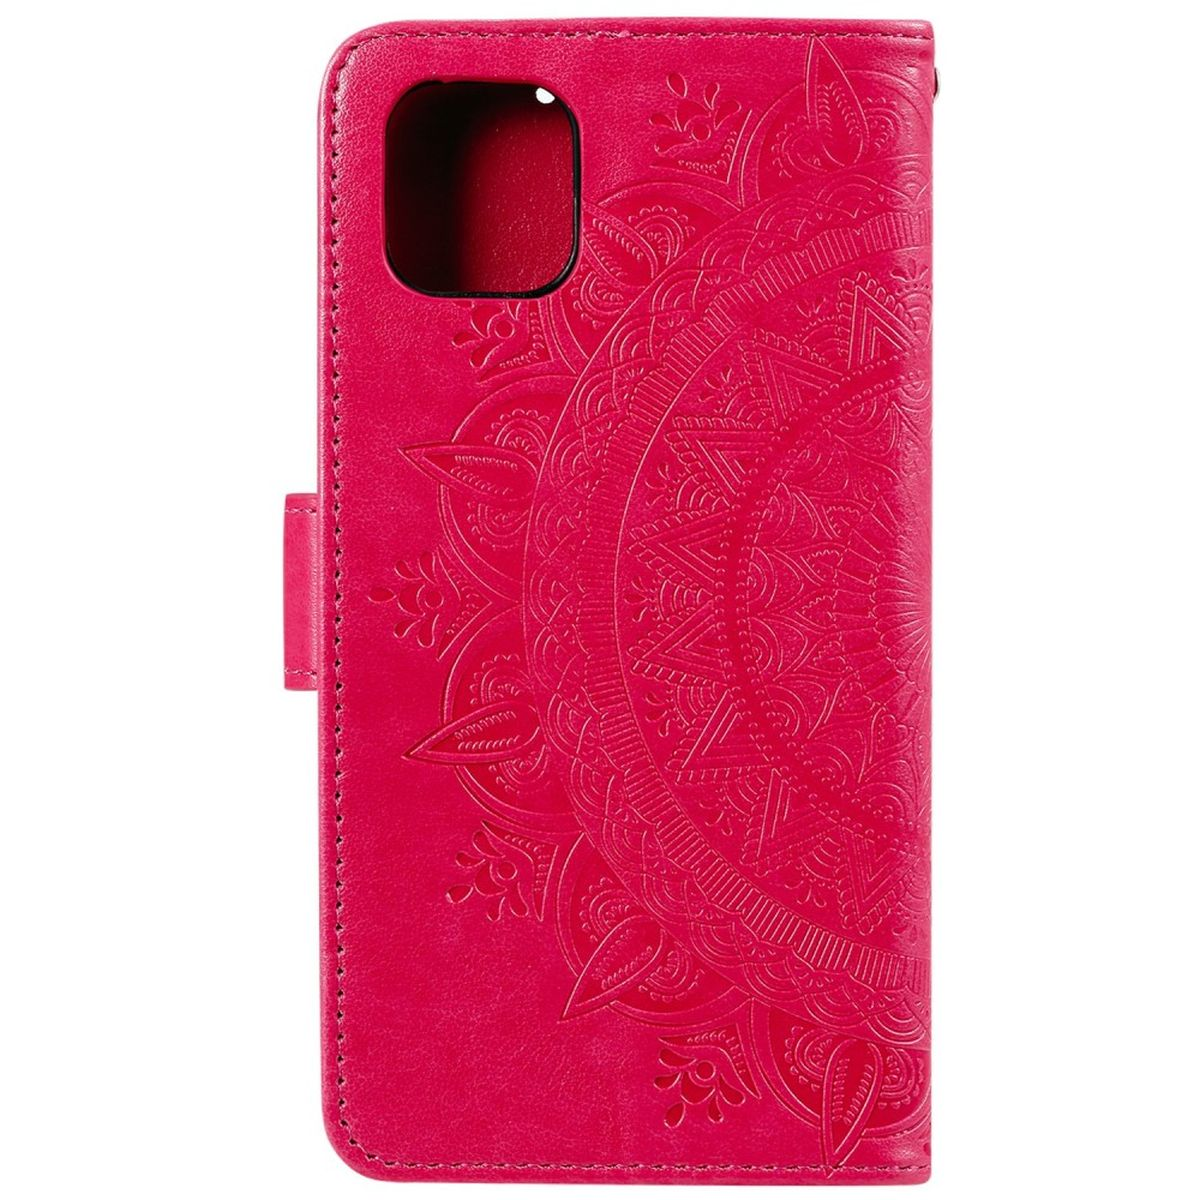 COVERKINGZ Klapphülle mit Samsung, Pink Bookcover, Mandala Galaxy Muster, A03